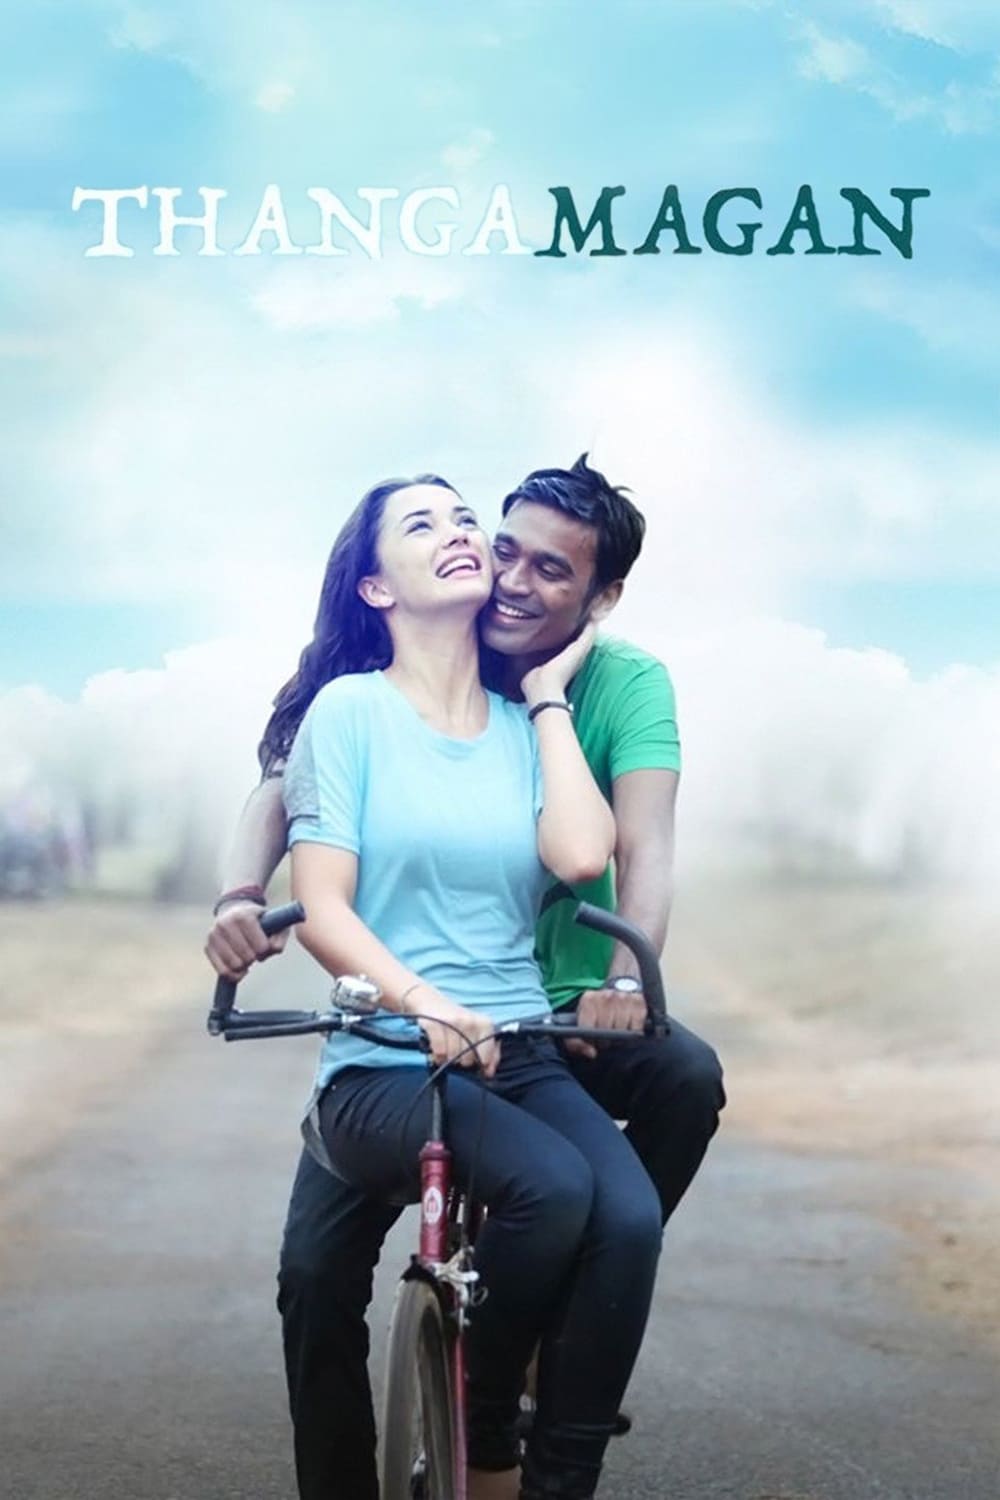 Poster for the movie "Thangamagan"